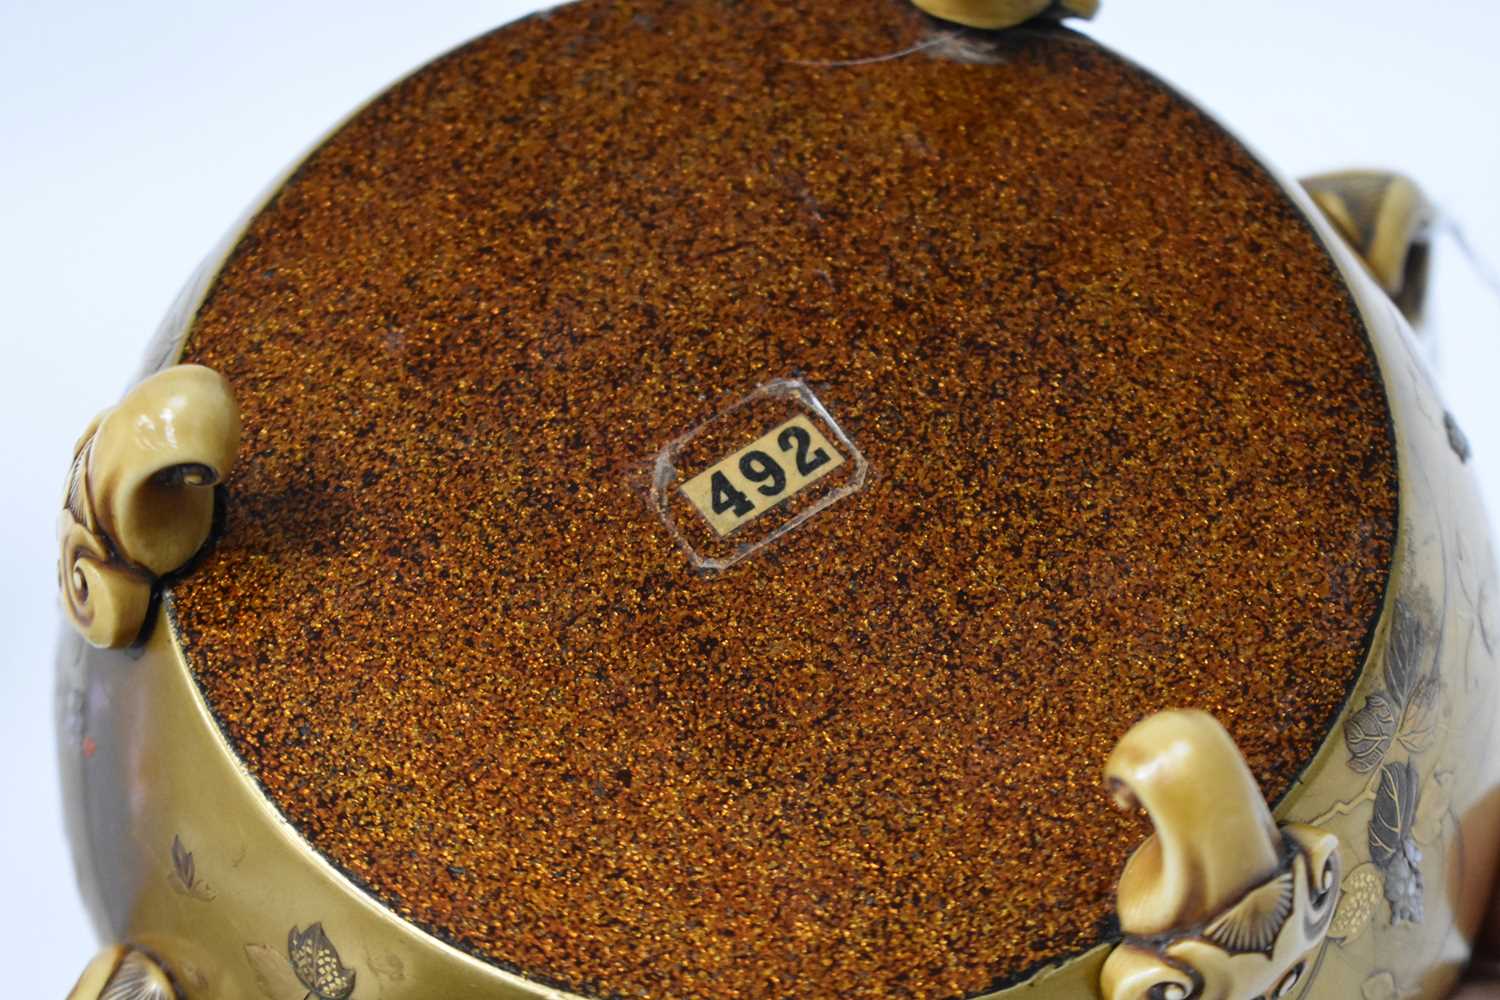 A 19TH CENTURY JAPANESE MEIJI PERIOD GOLD LACQUER SHIBAYAMA INLAID CIRCULAR CENSER decorated with - Image 25 of 25